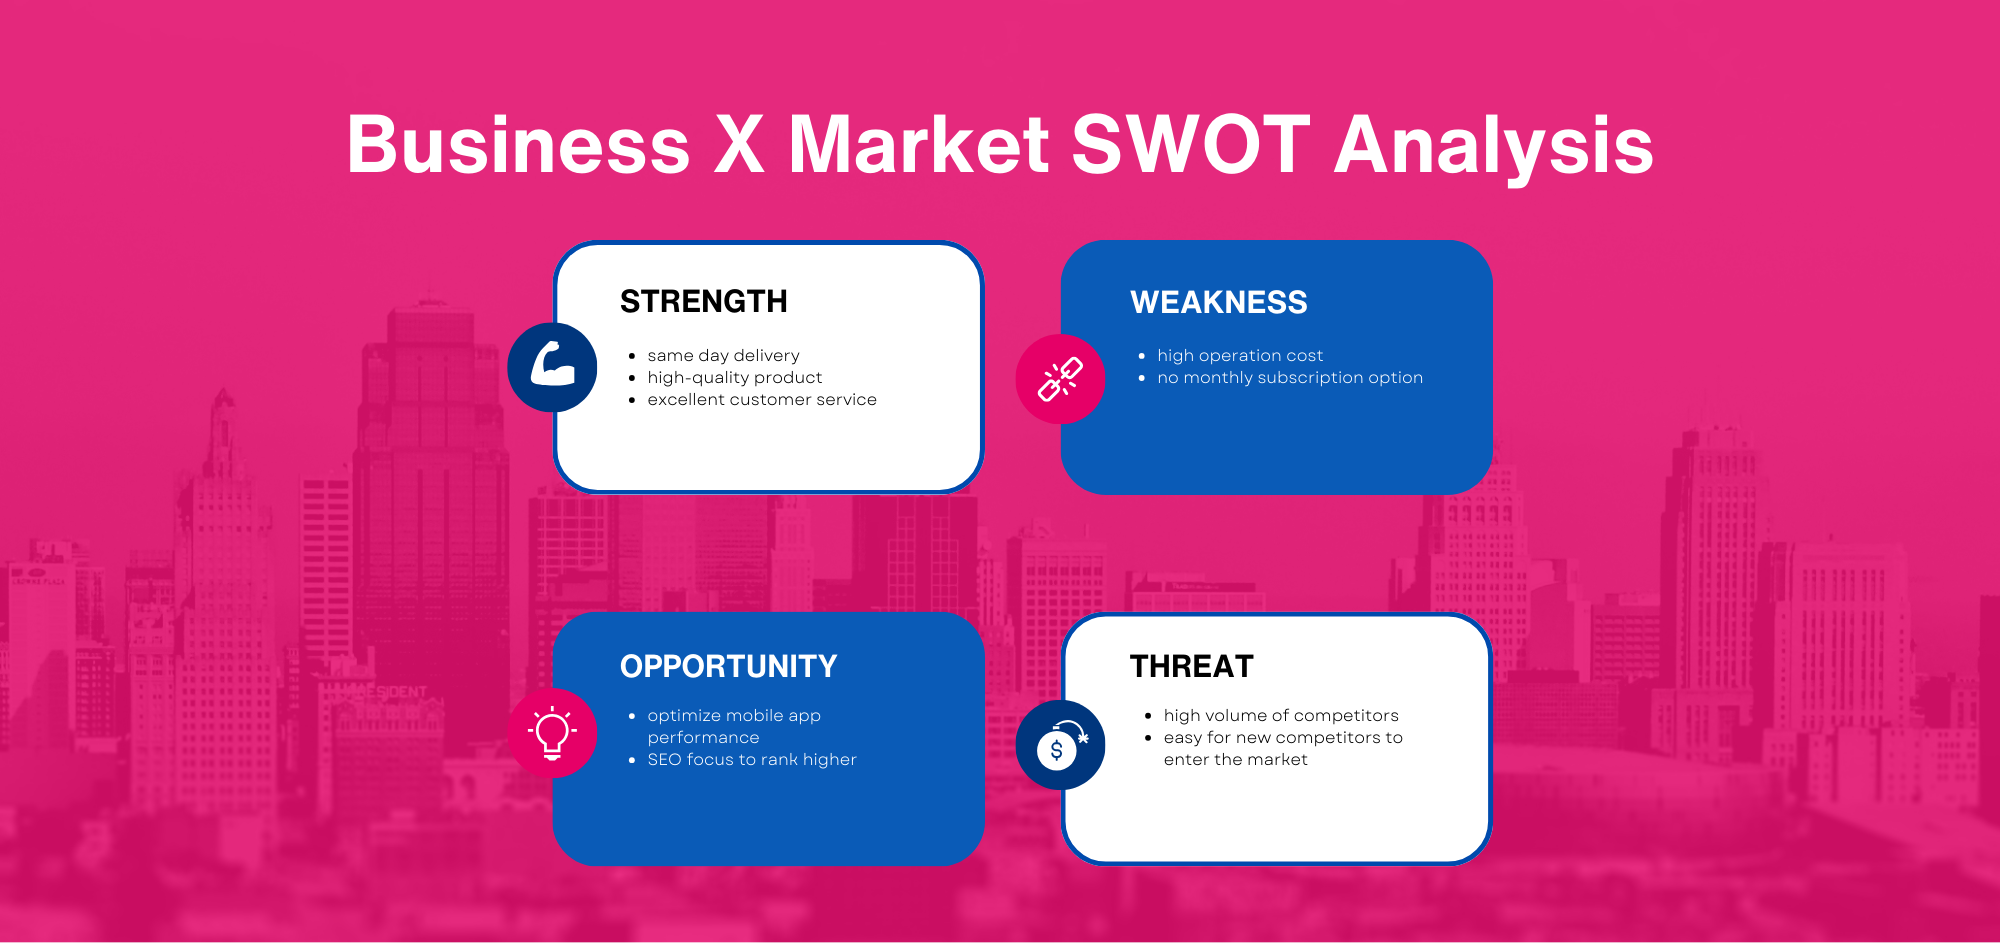 business market swot analysis example